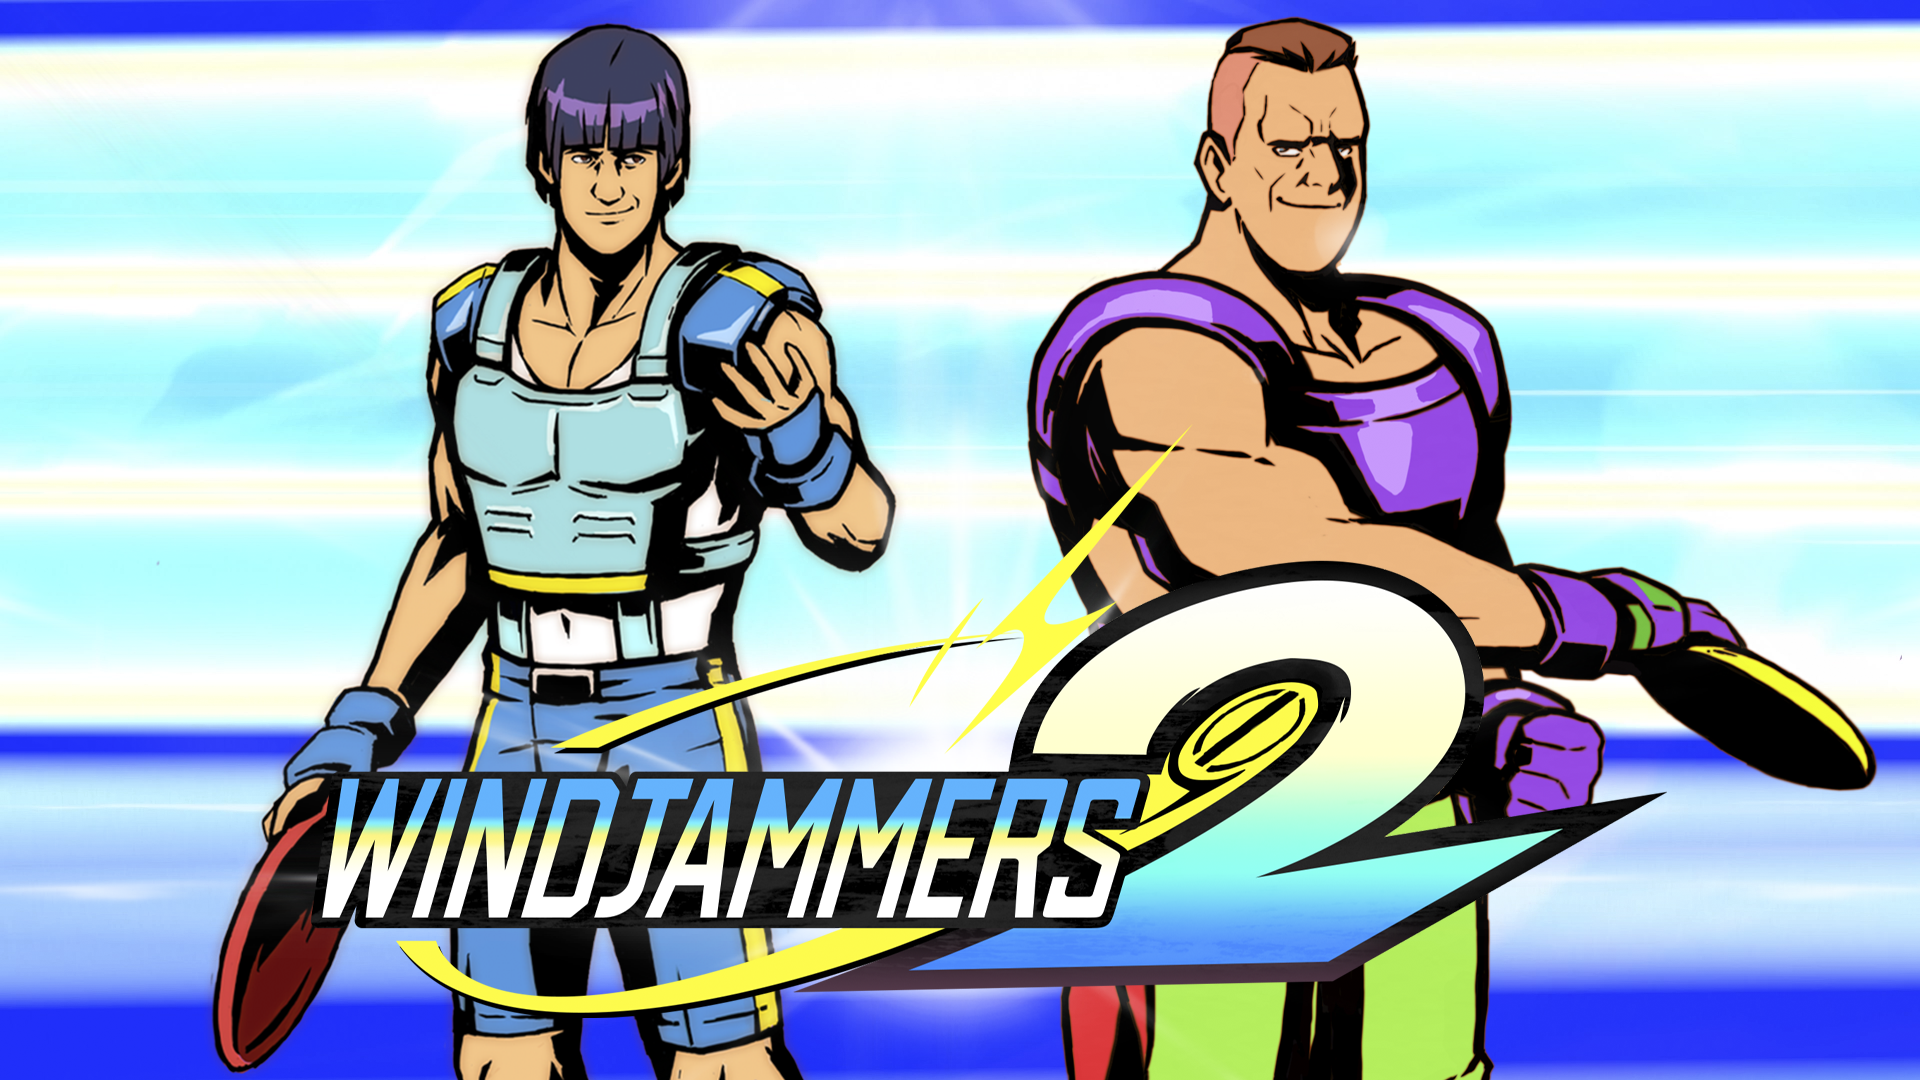 Windjammers 2 is coming to Xbox and GamePass, Sammy Ho and Jordi Costa announced!